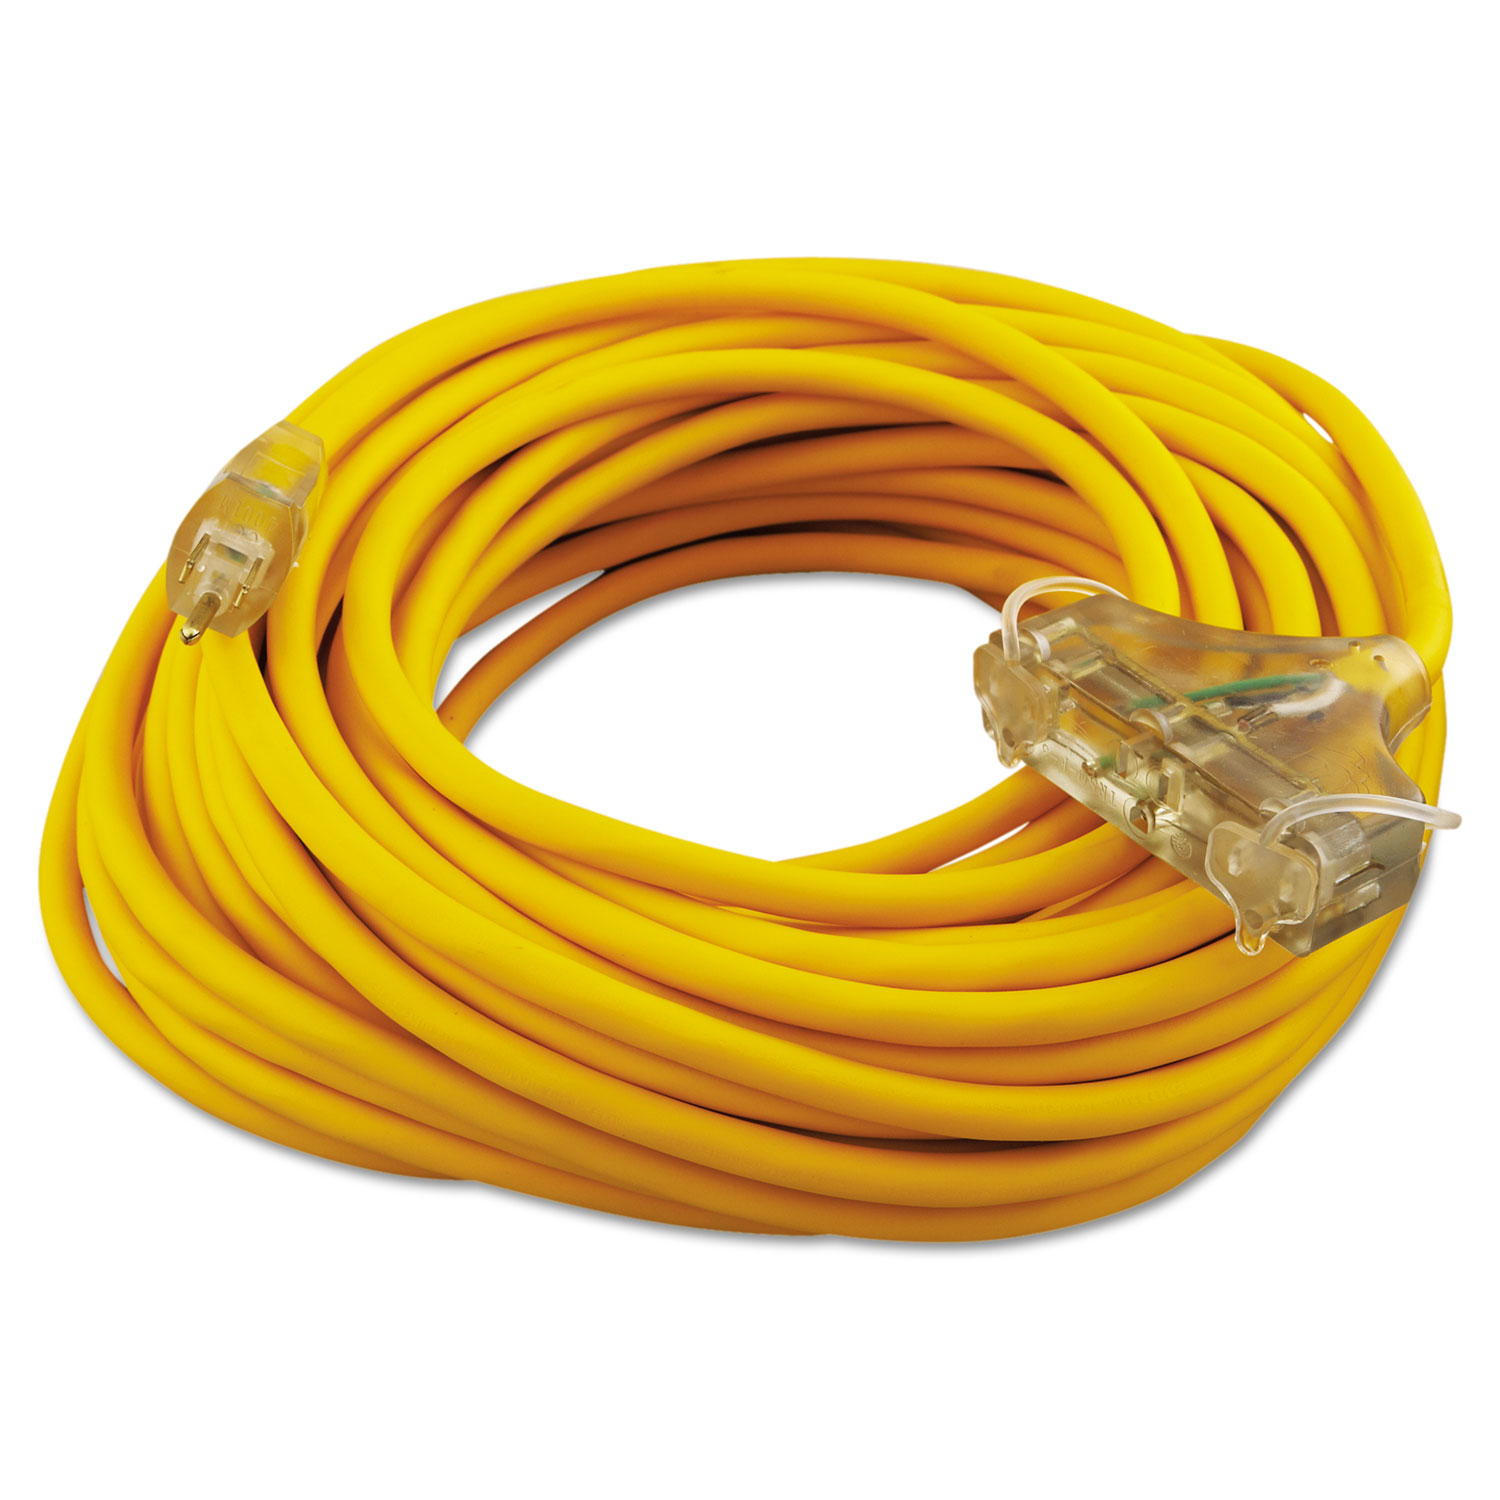 Polar/Solar Outdoor Extension Cord, 100ft, Three-Outlets, Yellow